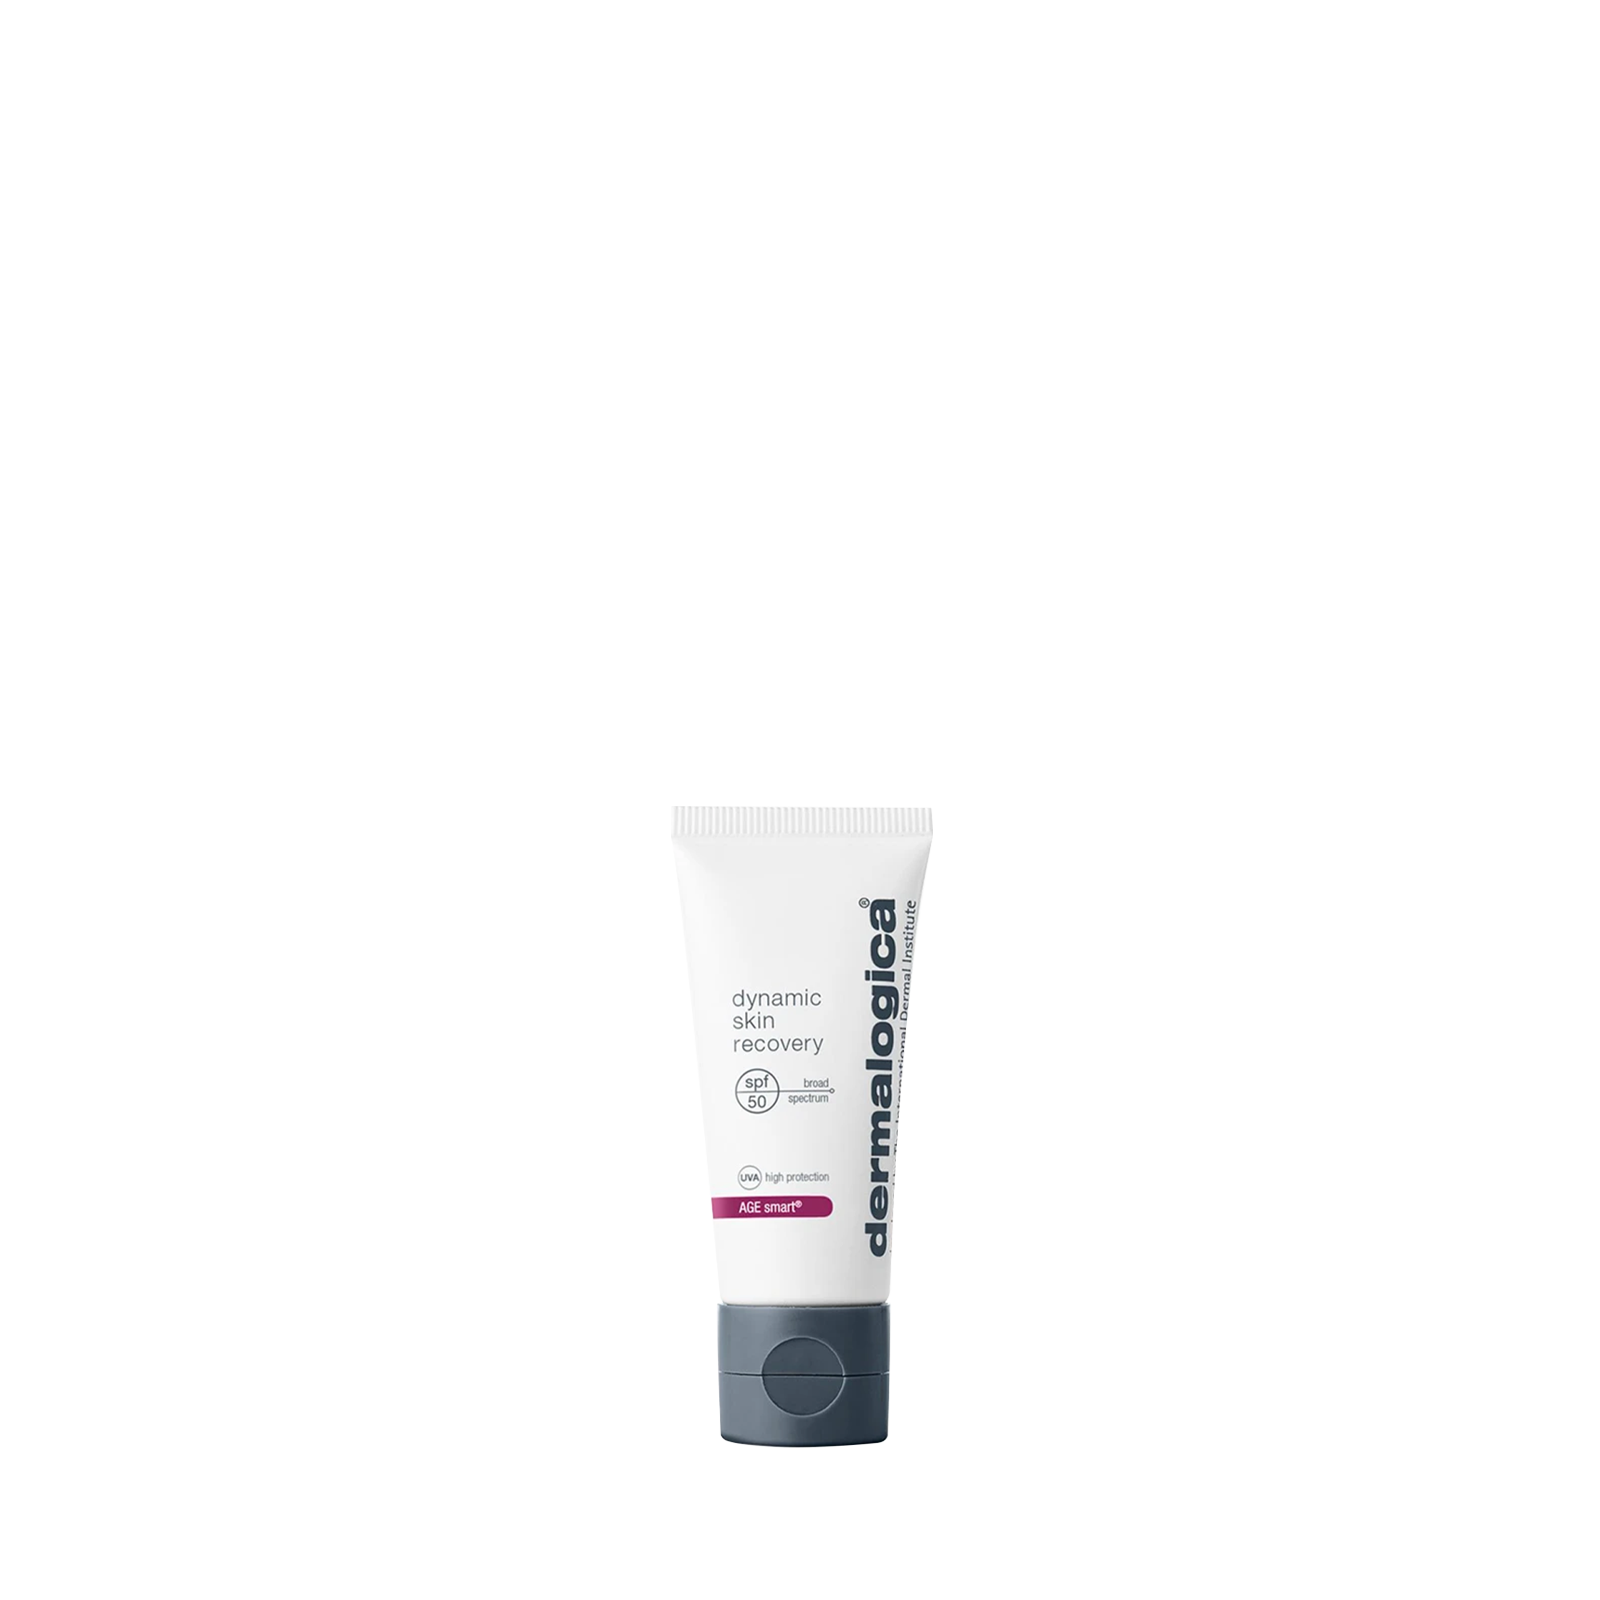 dynamic skin recovery spf50 format voyage